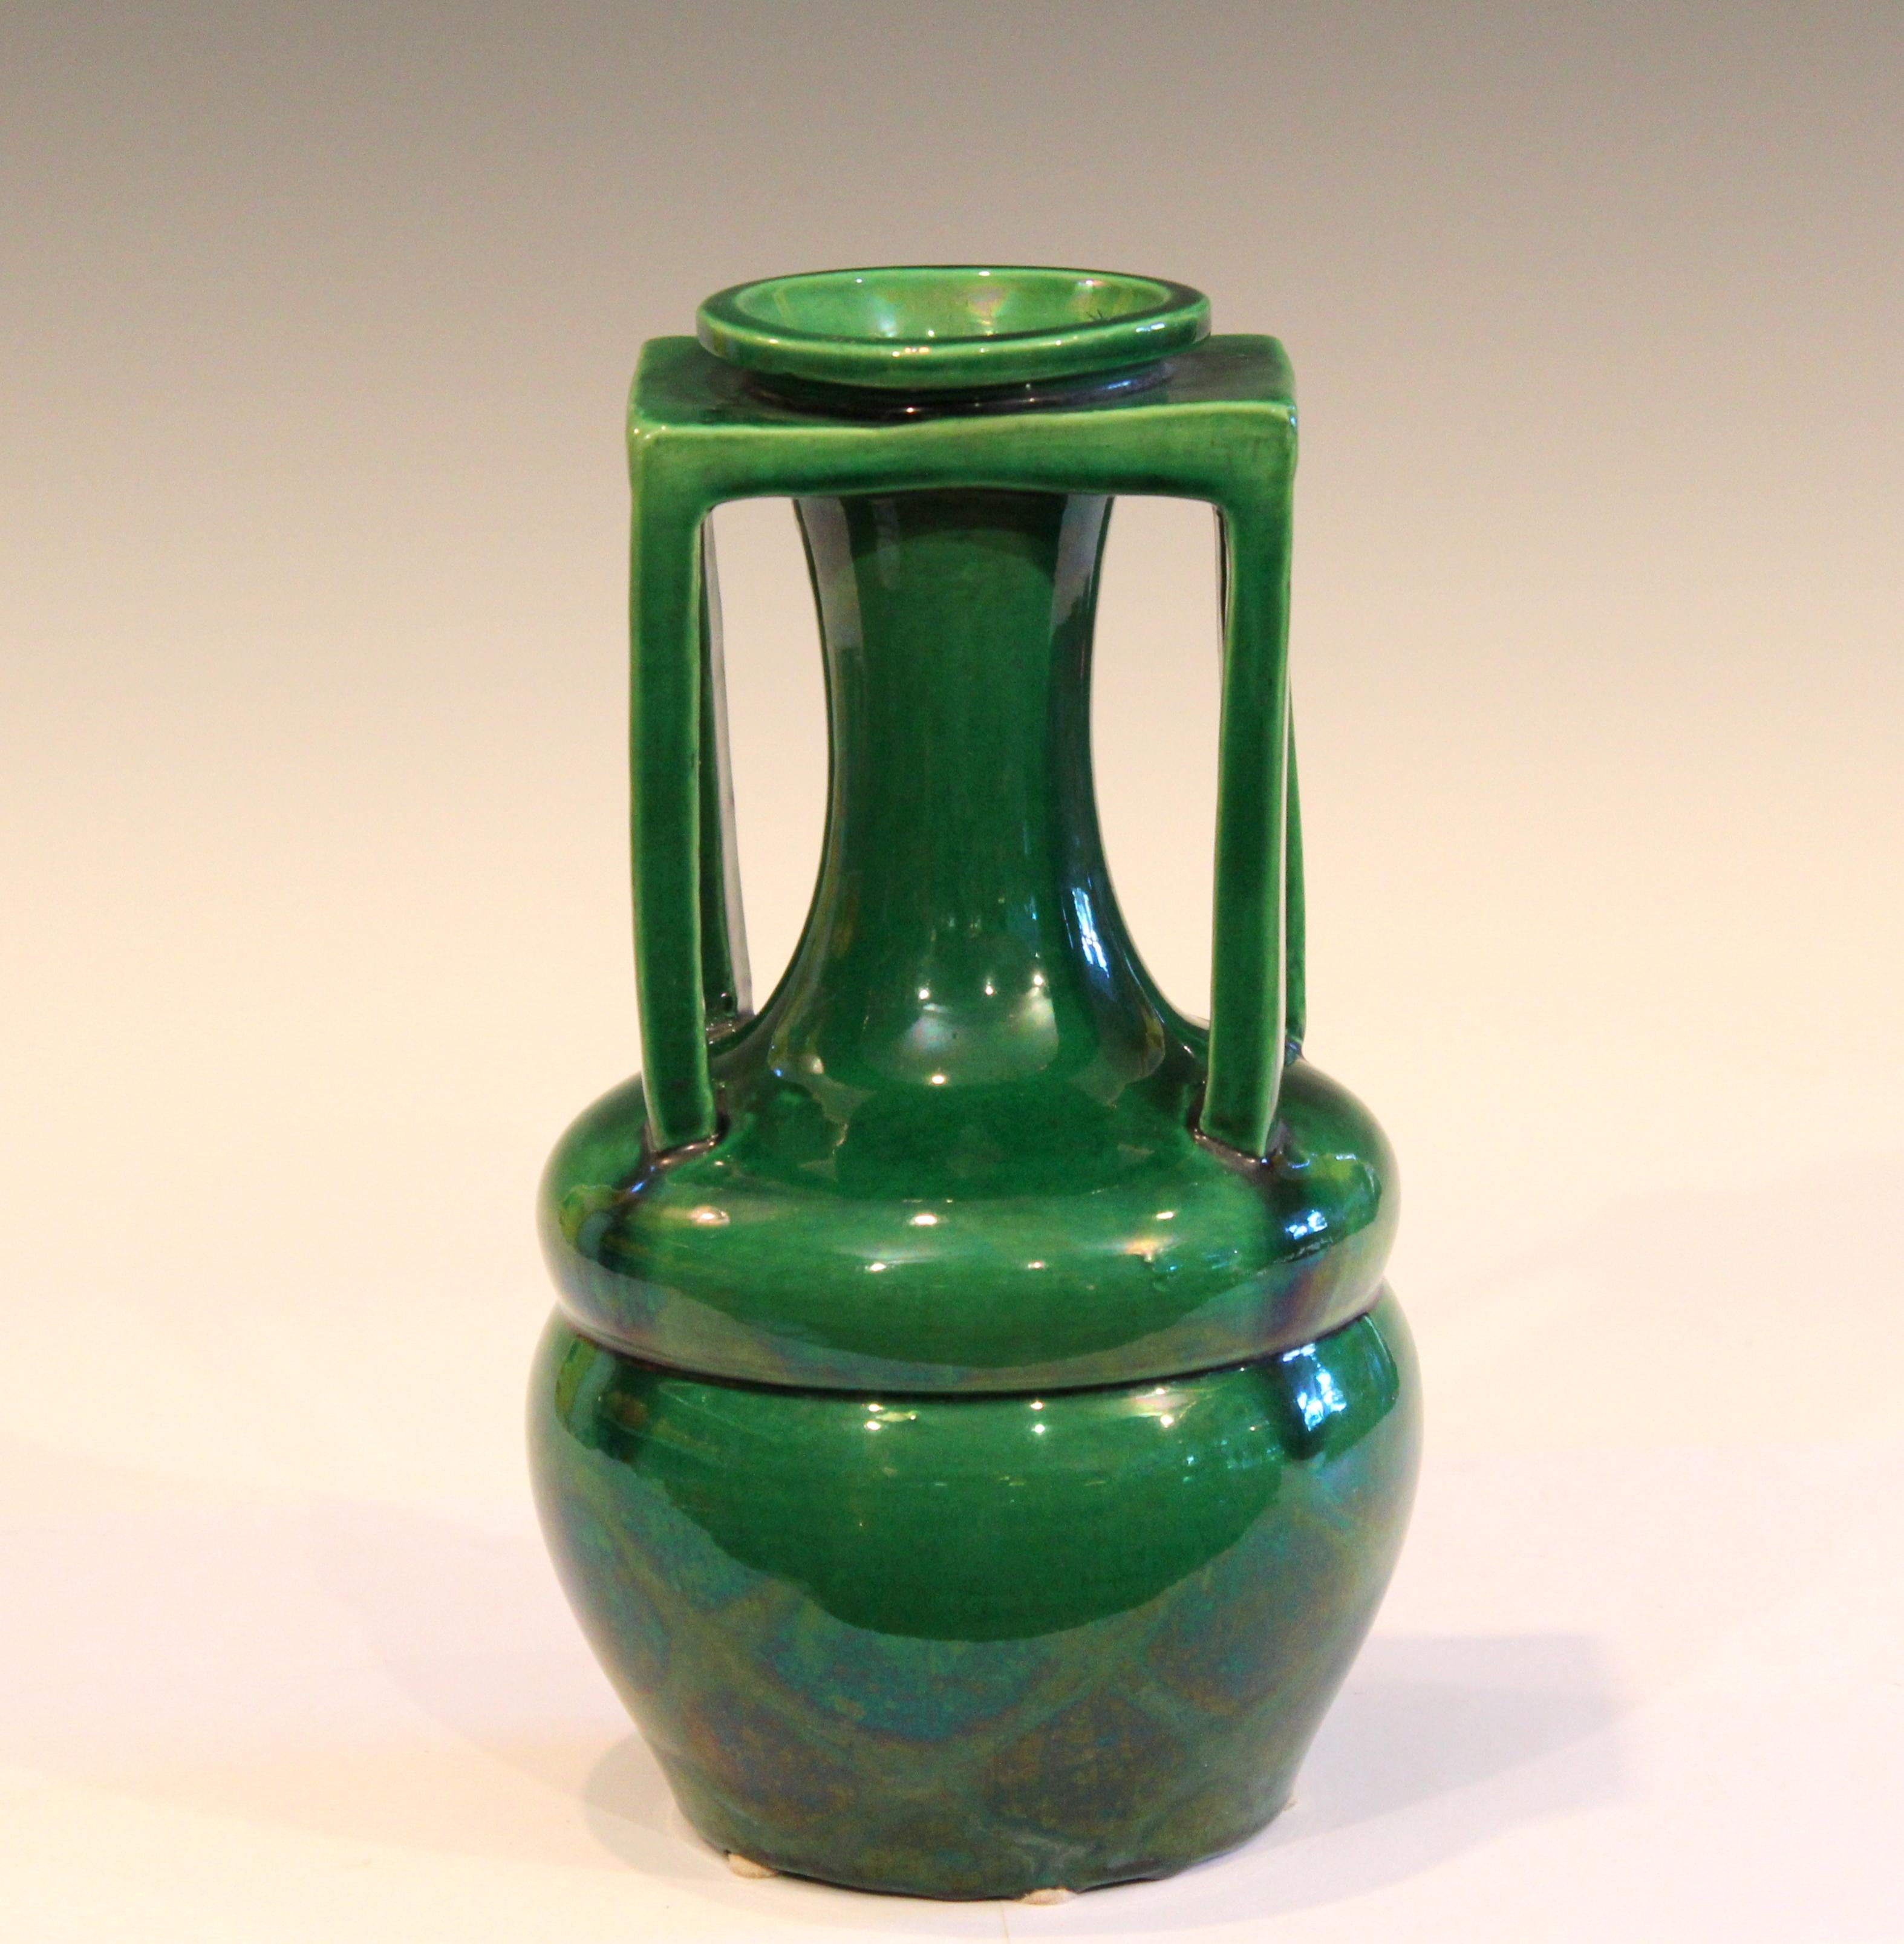 Vintage Awaji vase in terrific organic form with four architectural handles and rectangular collar supporting the elongated neck. With deep green monochrome glaze, circa 1920s. Measures: 10